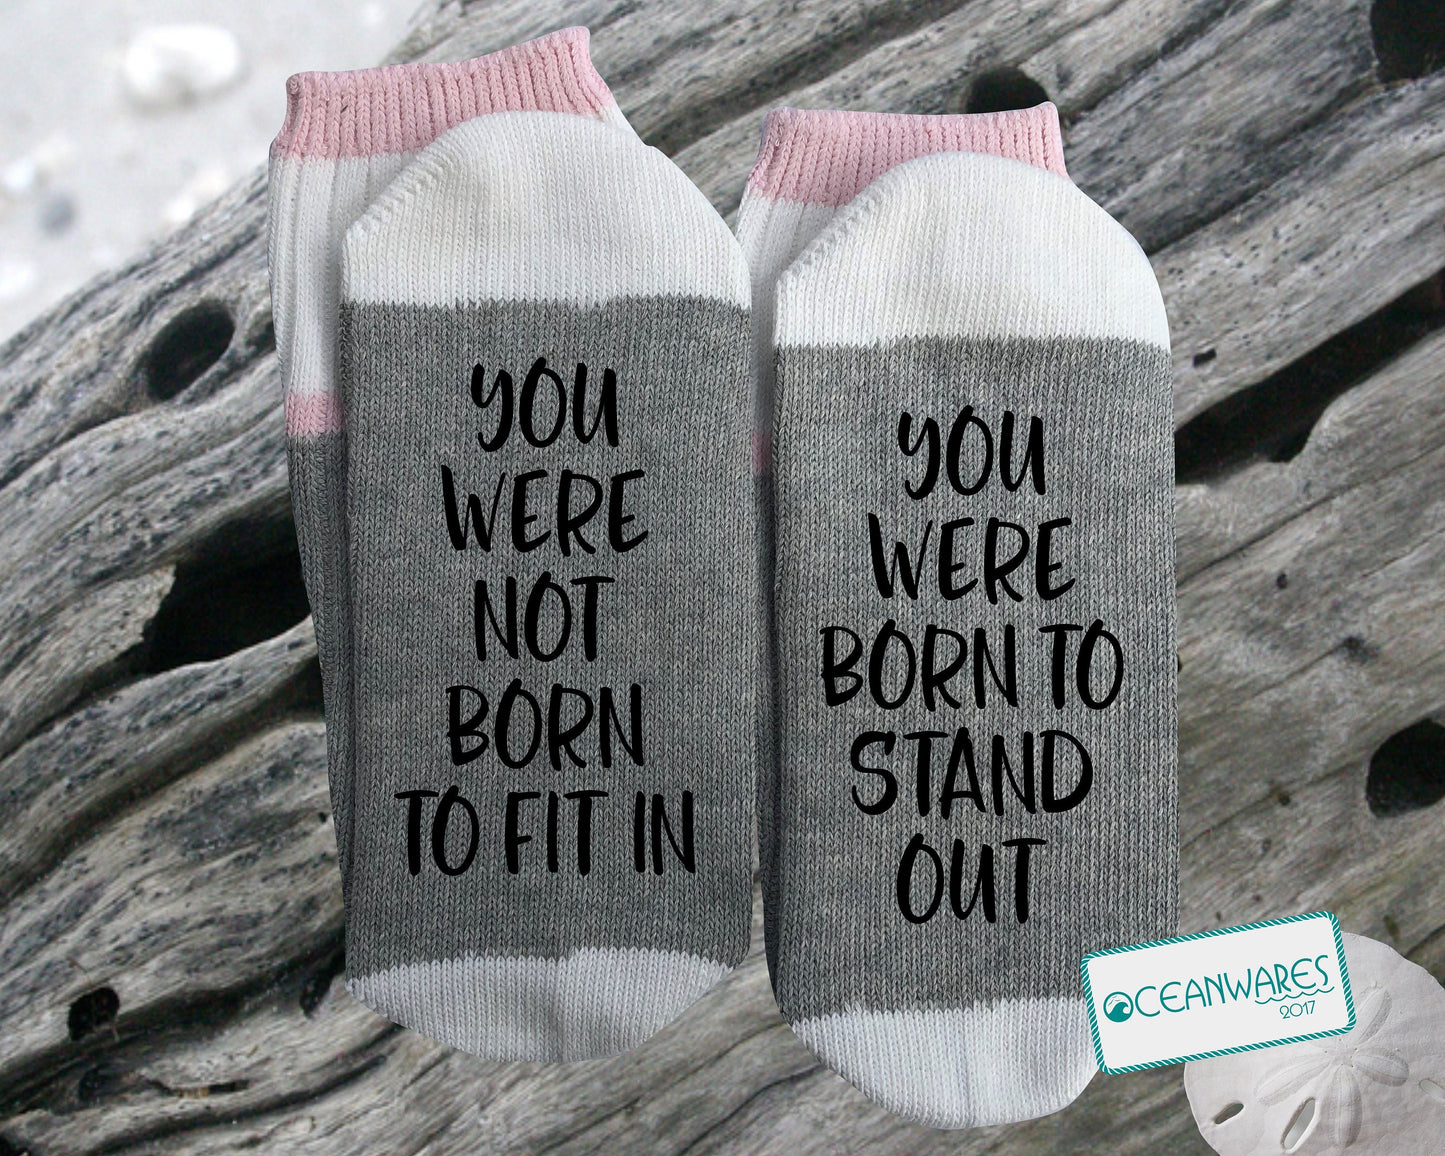 You were not born to fit in, you were born to stand out, SUPER SOFT NOVELTY WORD SOCKS.